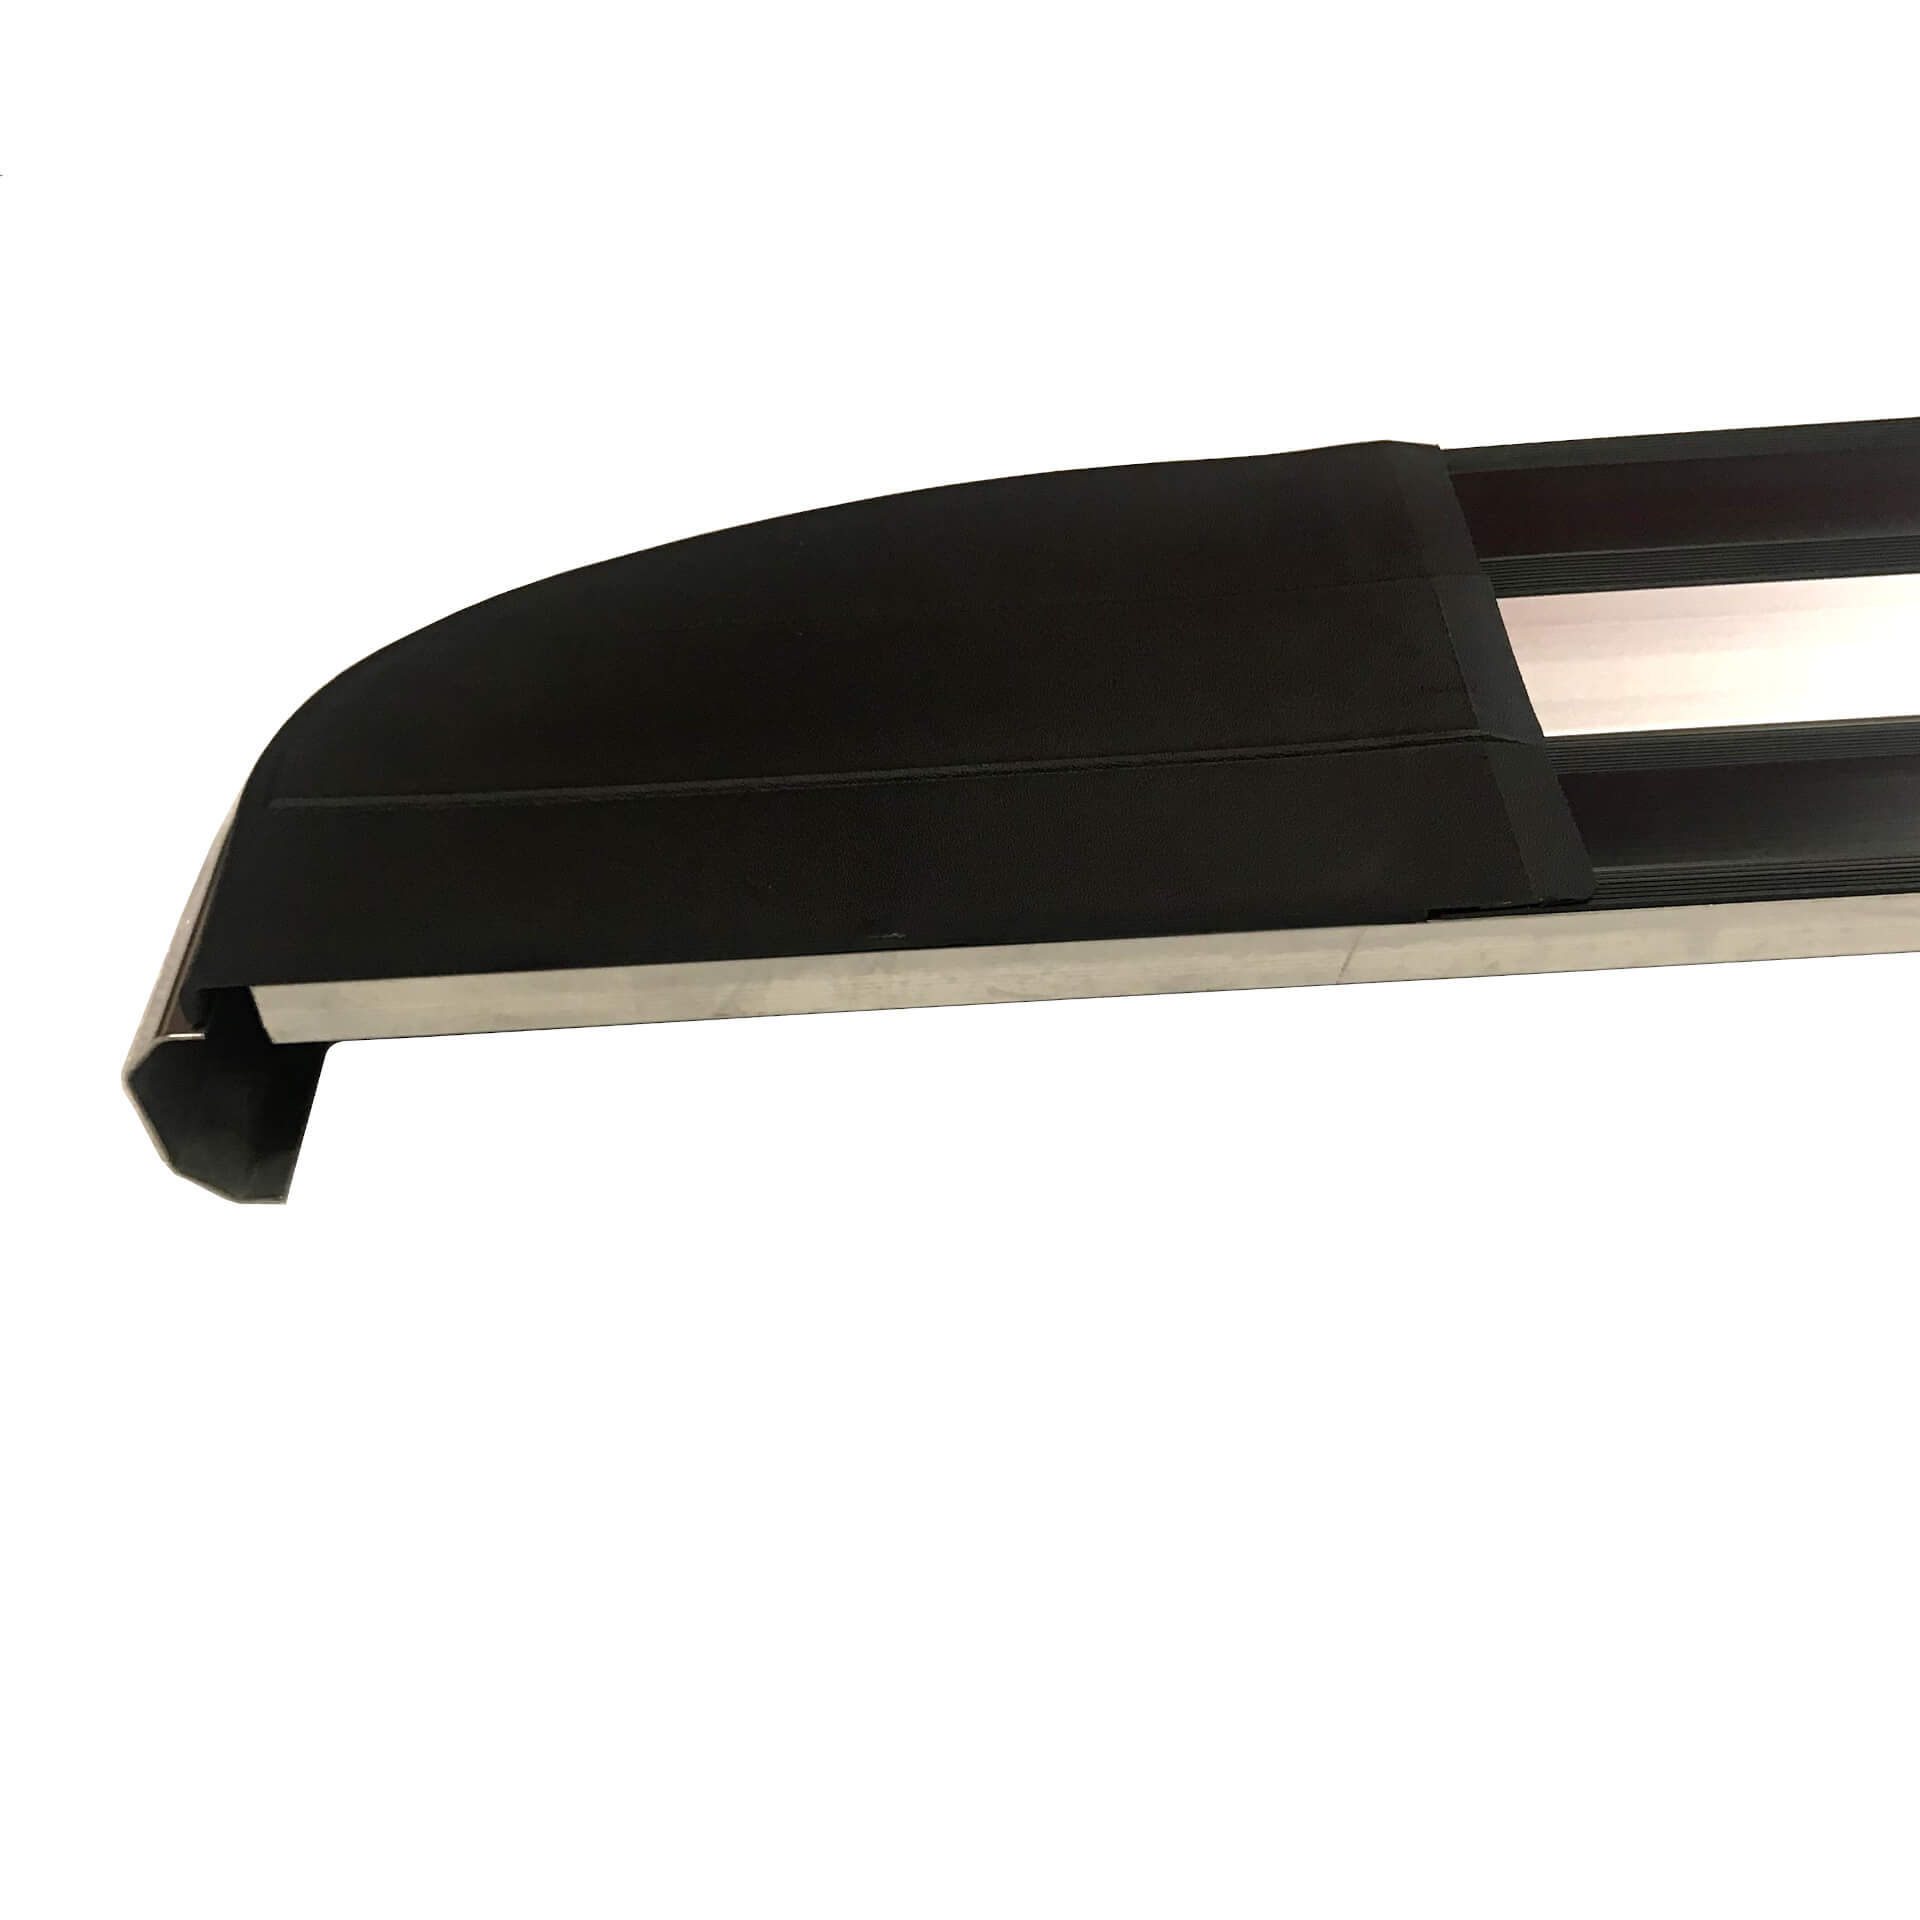 Panther Side Steps Running Boards for Nissan Qashqai 2007-2013 -  - sold by Direct4x4